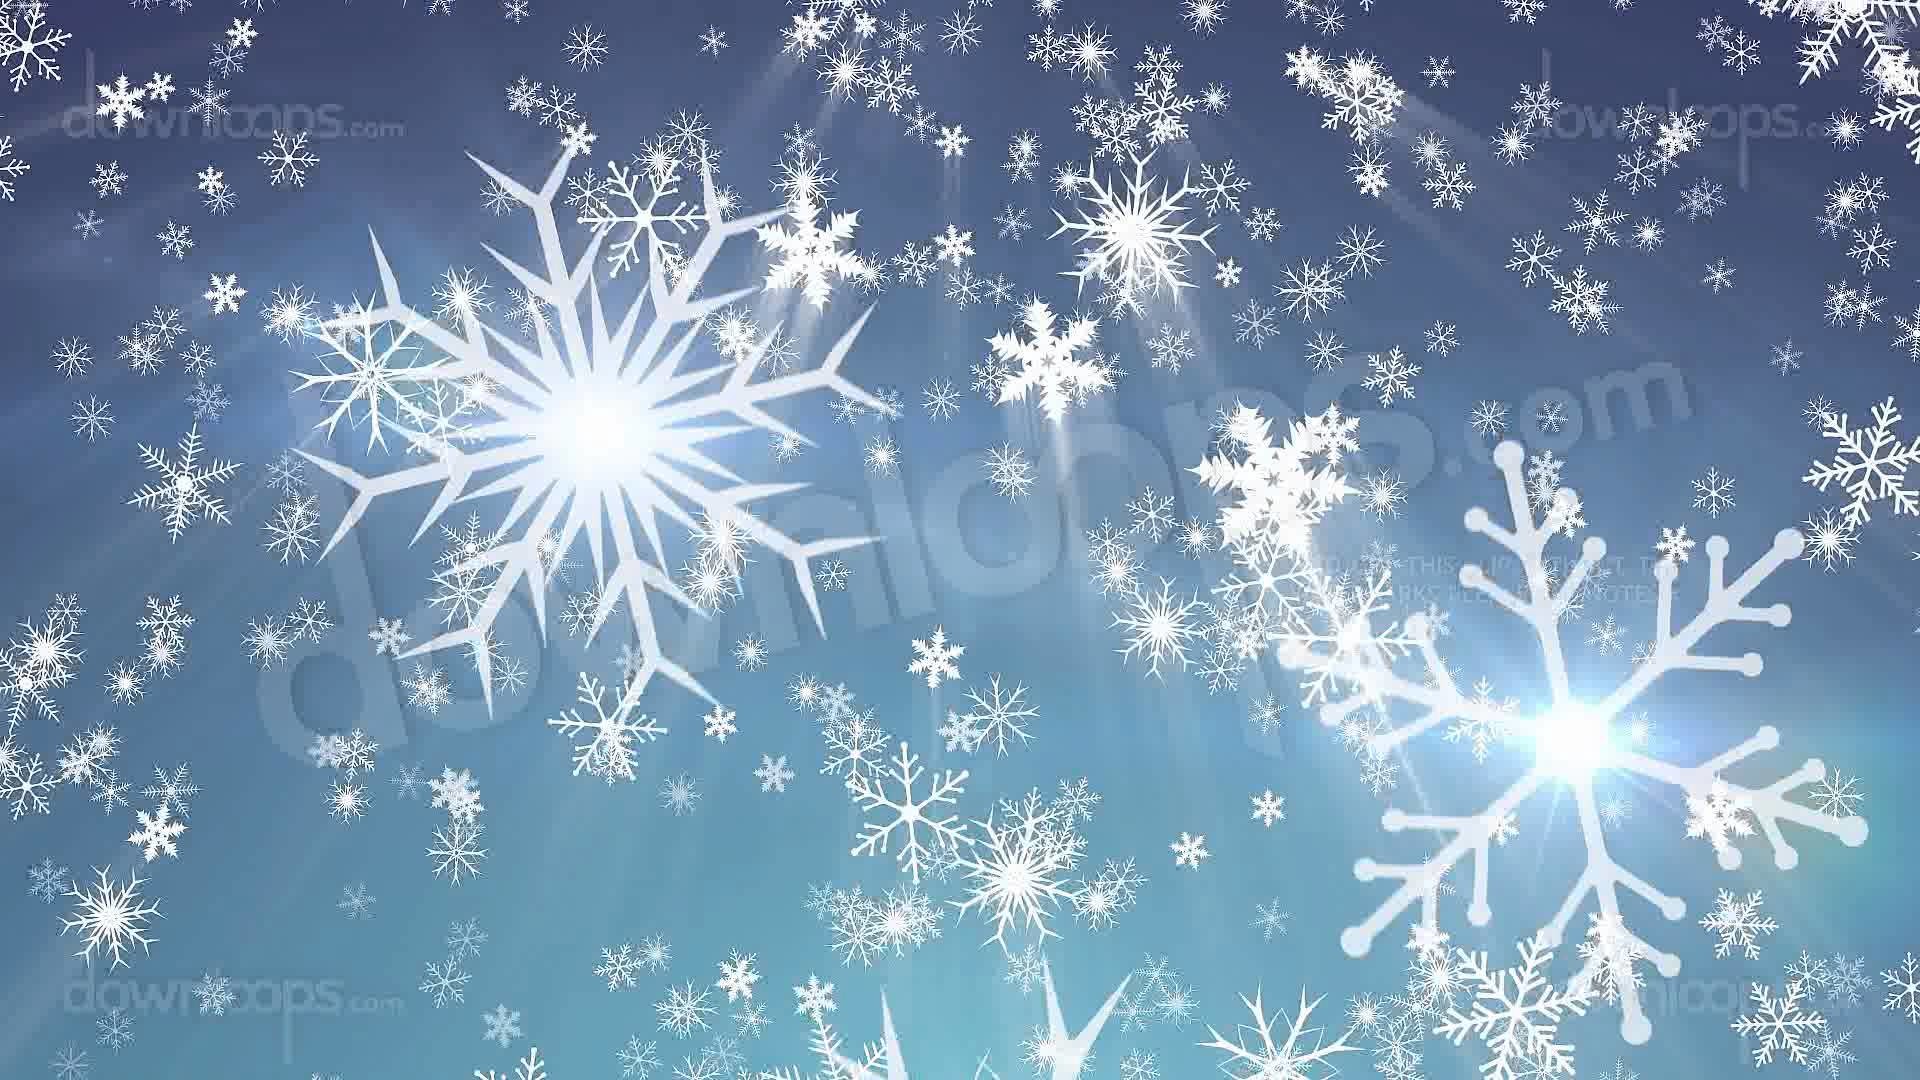 1920x1080 Snowy 1 - Snow / Christmas Video Loop / Animated Motion Background .